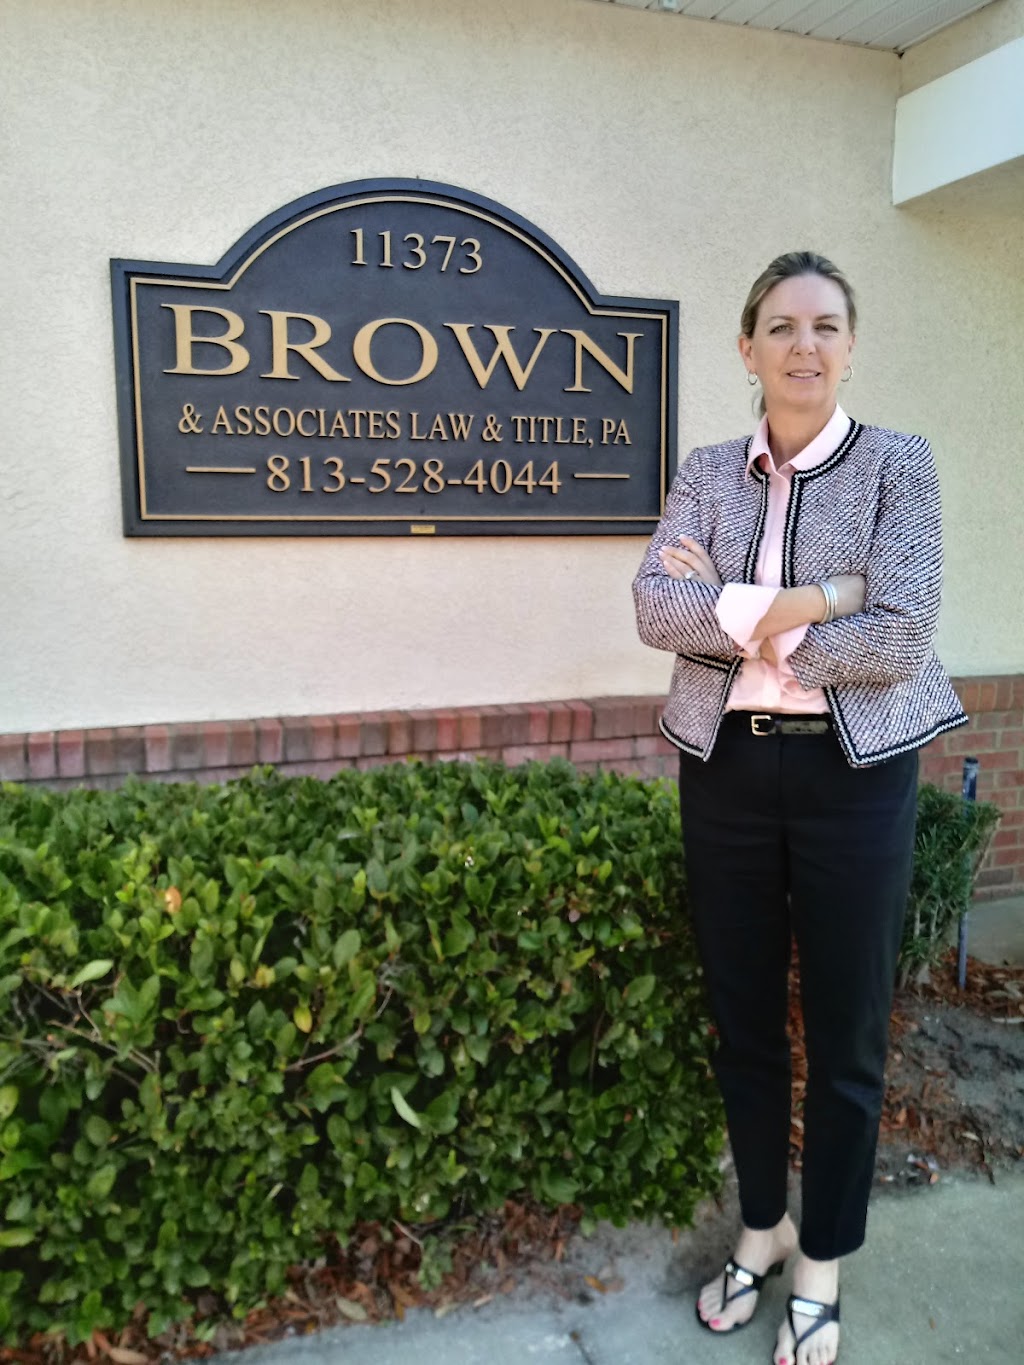 Brown & Associates Law & Title, P.A. | 11373 Countryway Blvd, Tampa, FL 33626, USA | Phone: (813) 528-4044